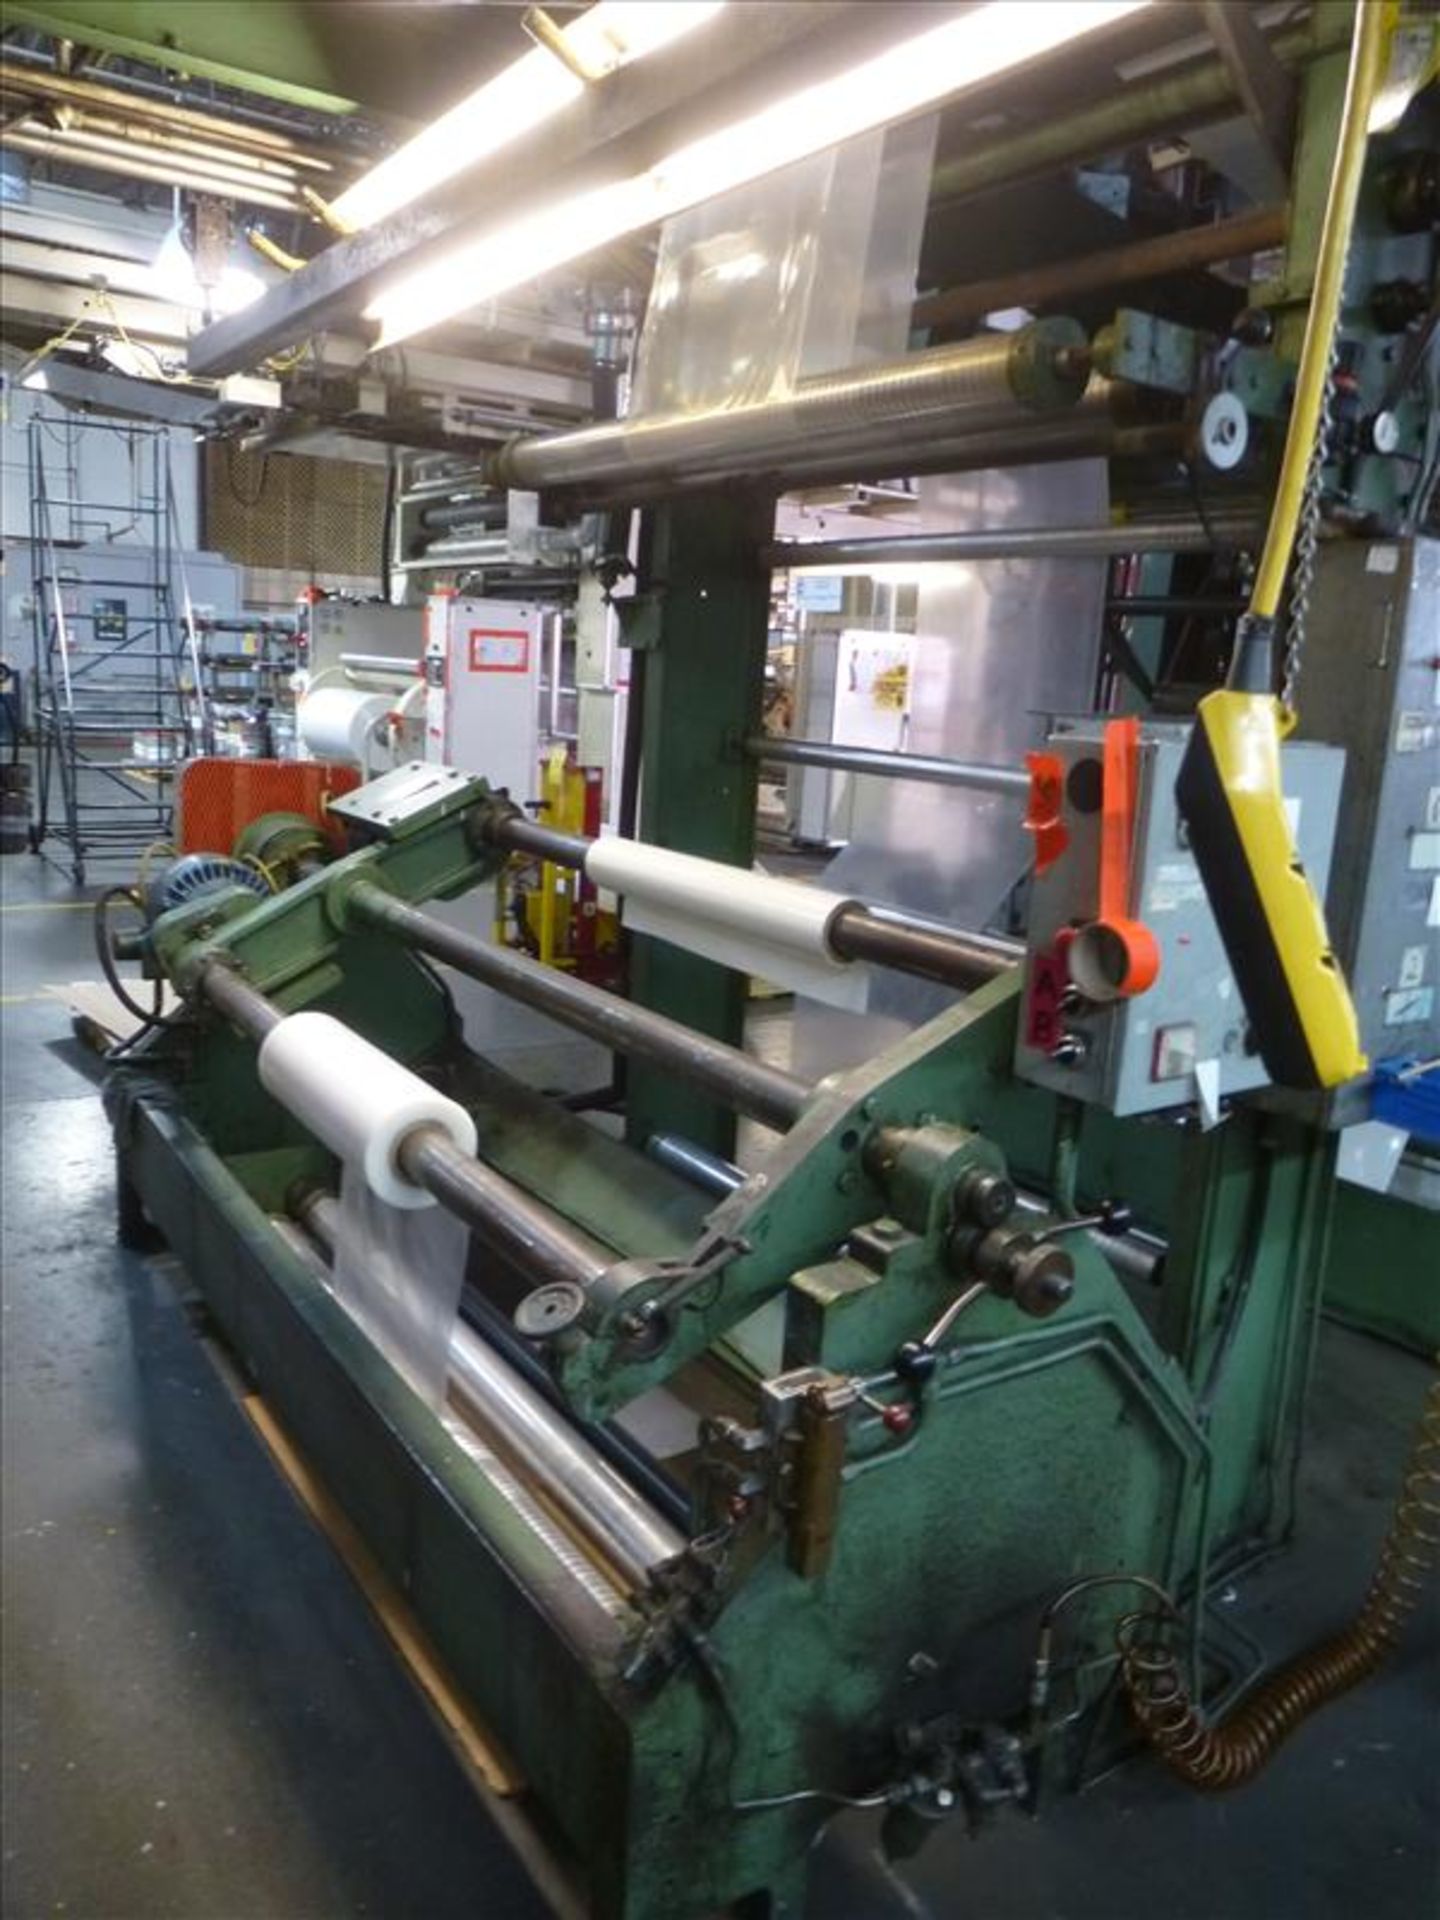 PCMC (Paper Converting Machine Co.) 6-colour central impression flexographic printing press, 56" - Image 12 of 30